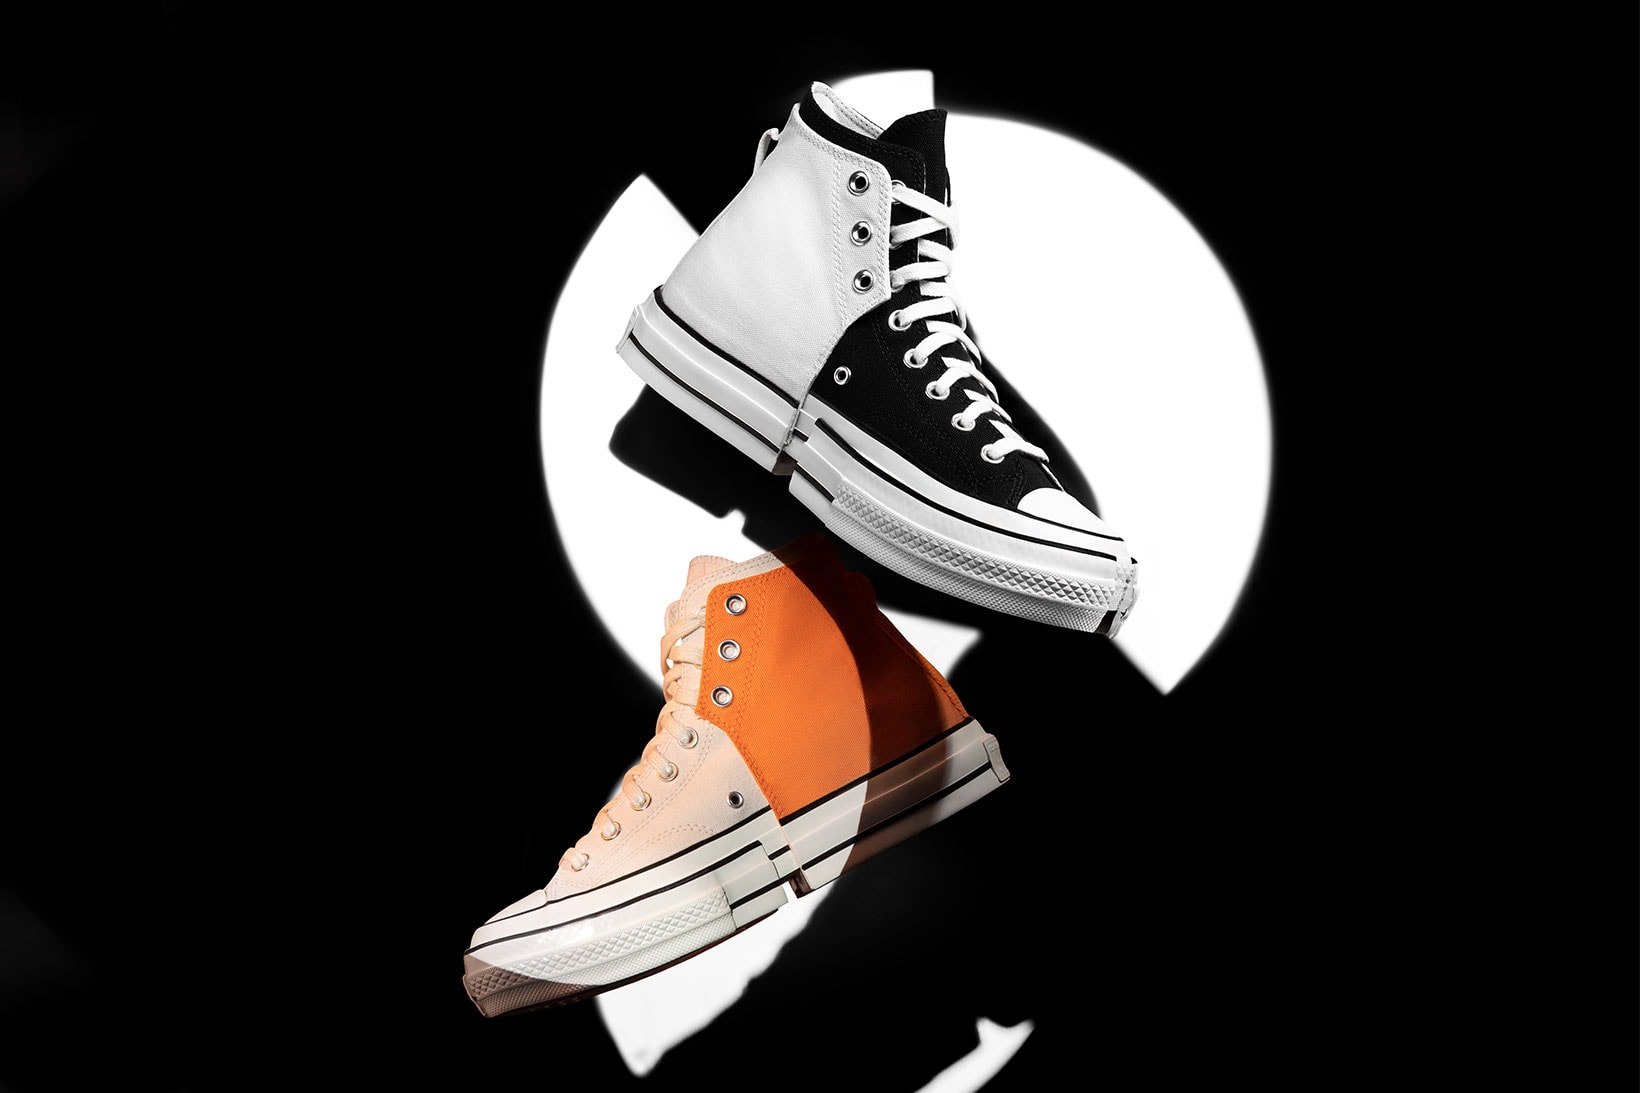 feng chen wang converse chuck 70 2 in 1 high top deconstructed sneakers black white orange collaboration